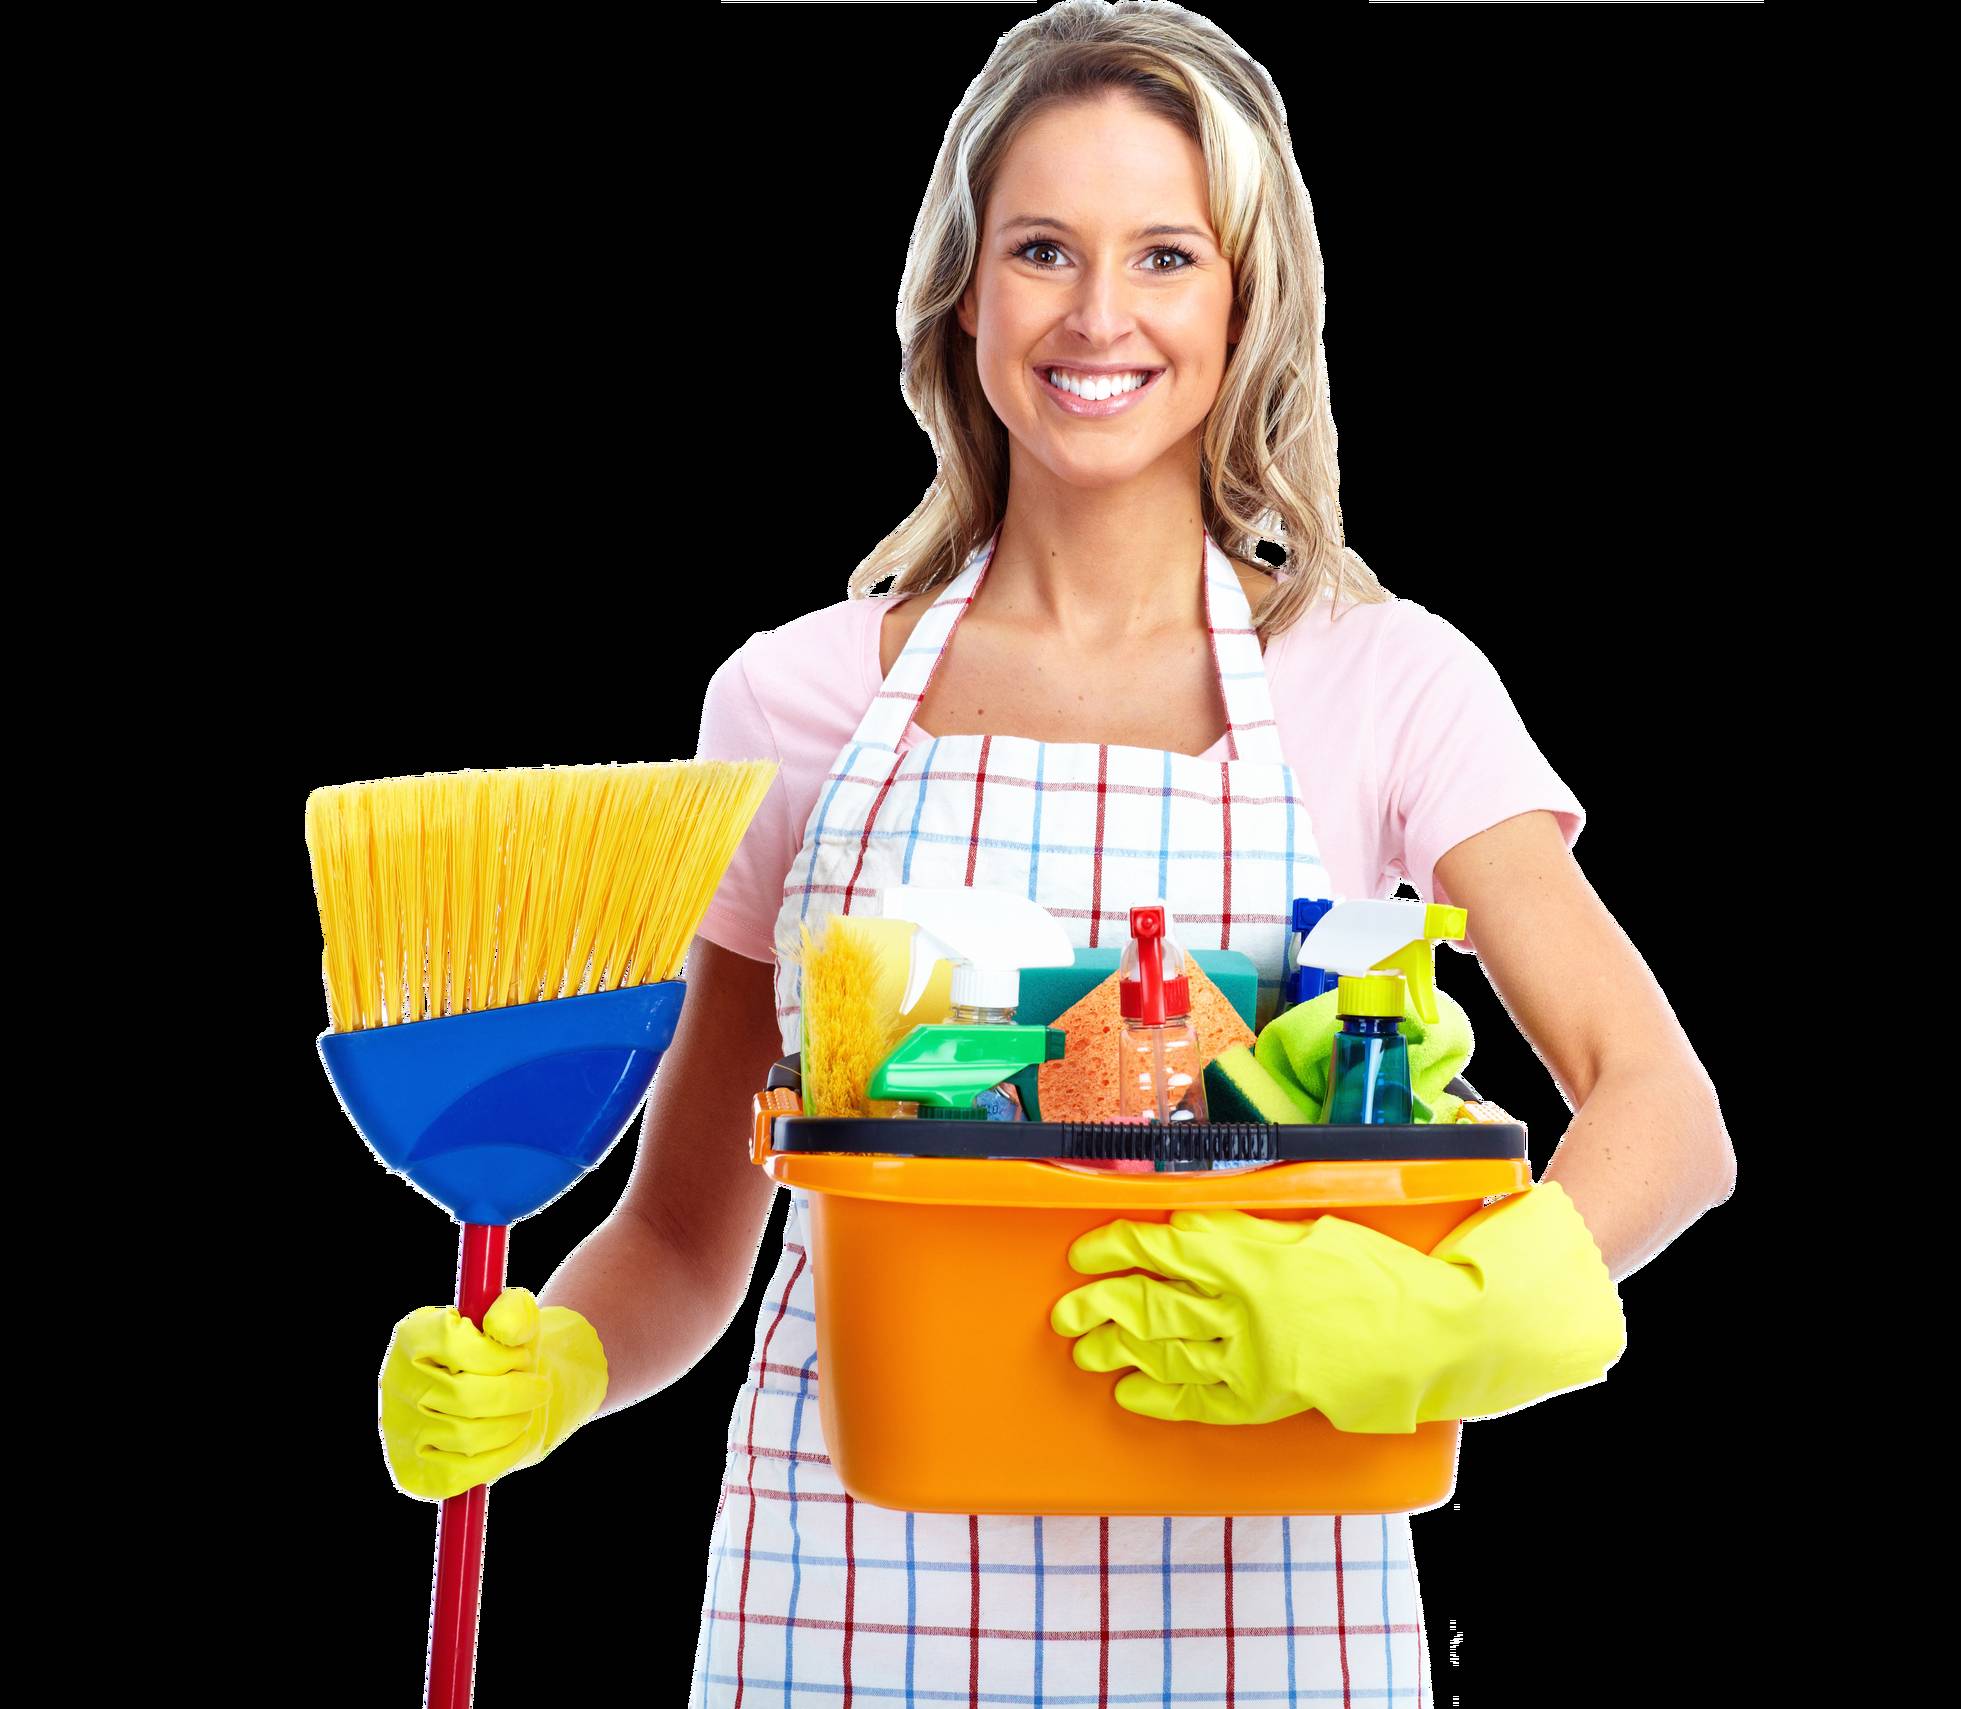 rsz_clear-young-smiling-cleaner-woman